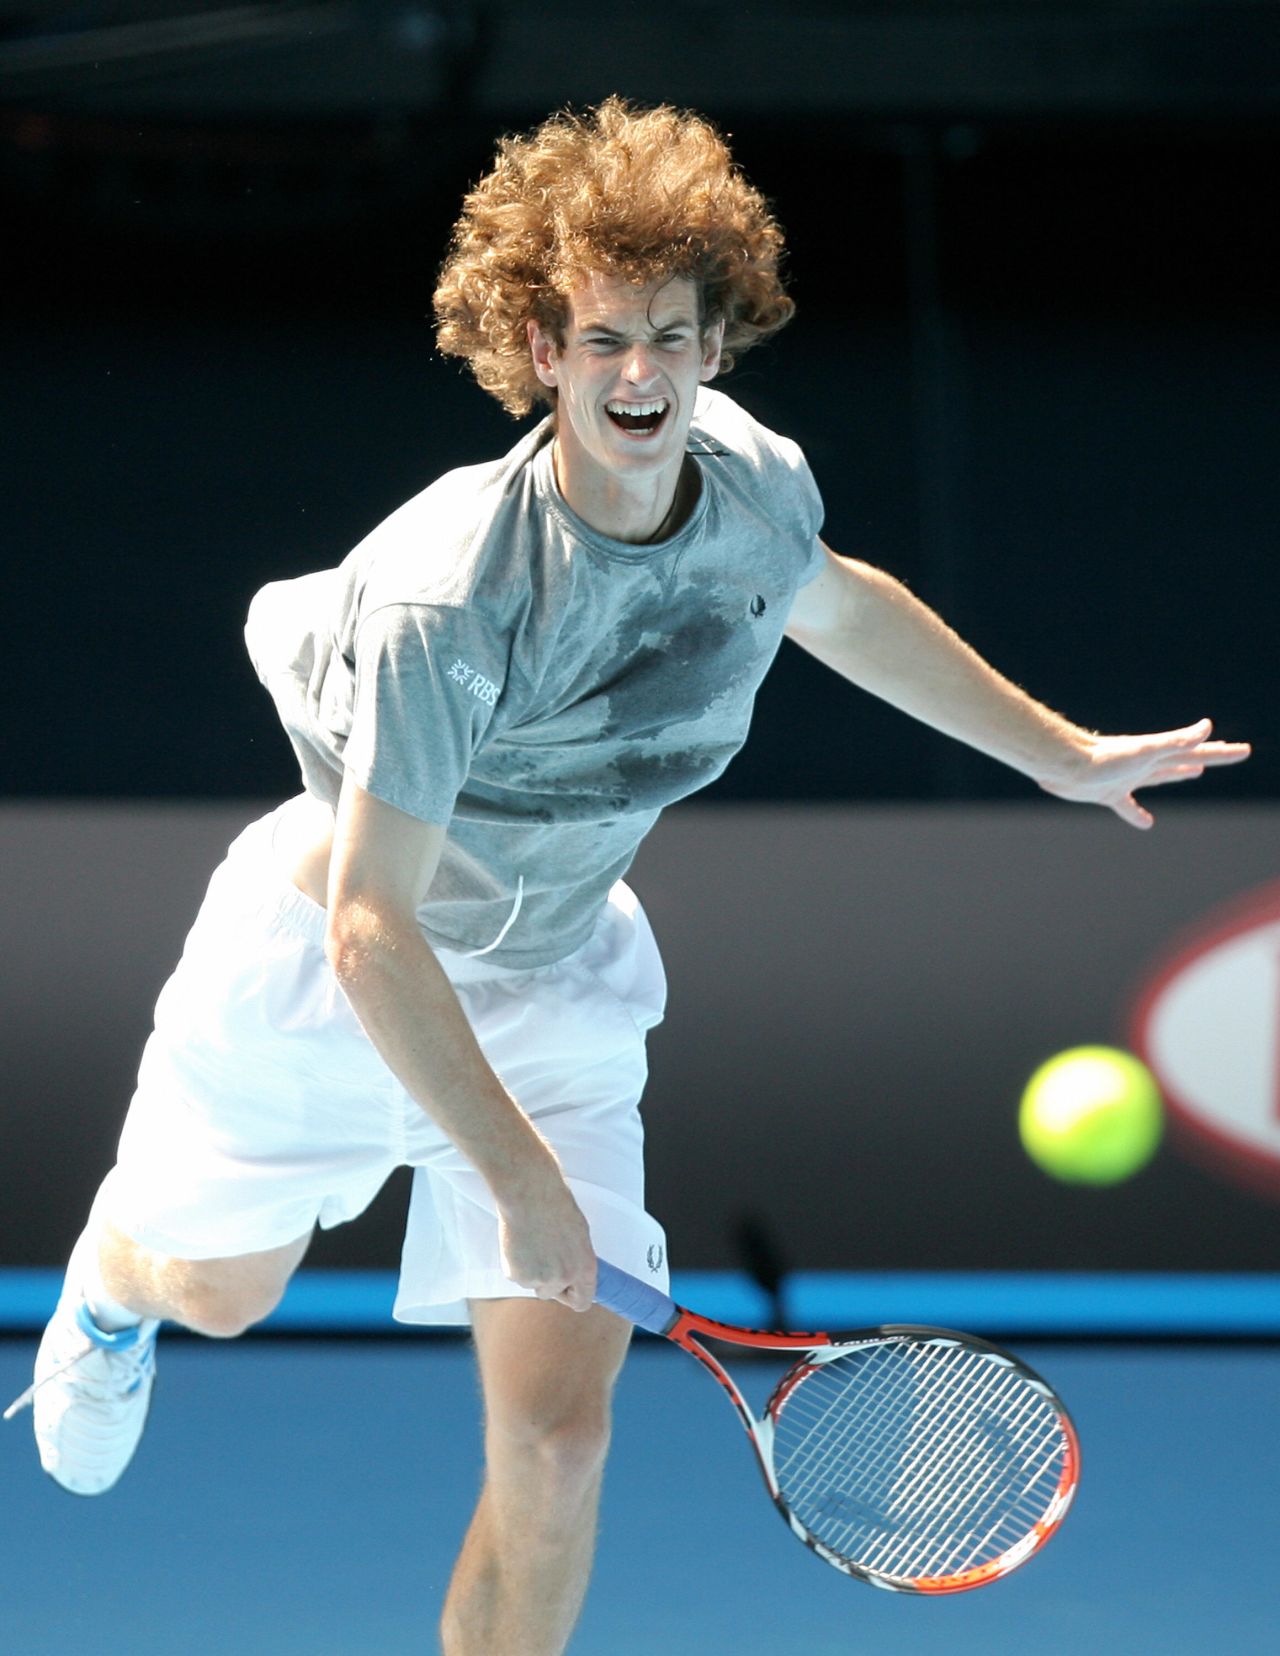  Andy Murray had quite a mane back in 2008, as evidenced by this image of him competing at the Australian Open that year. 